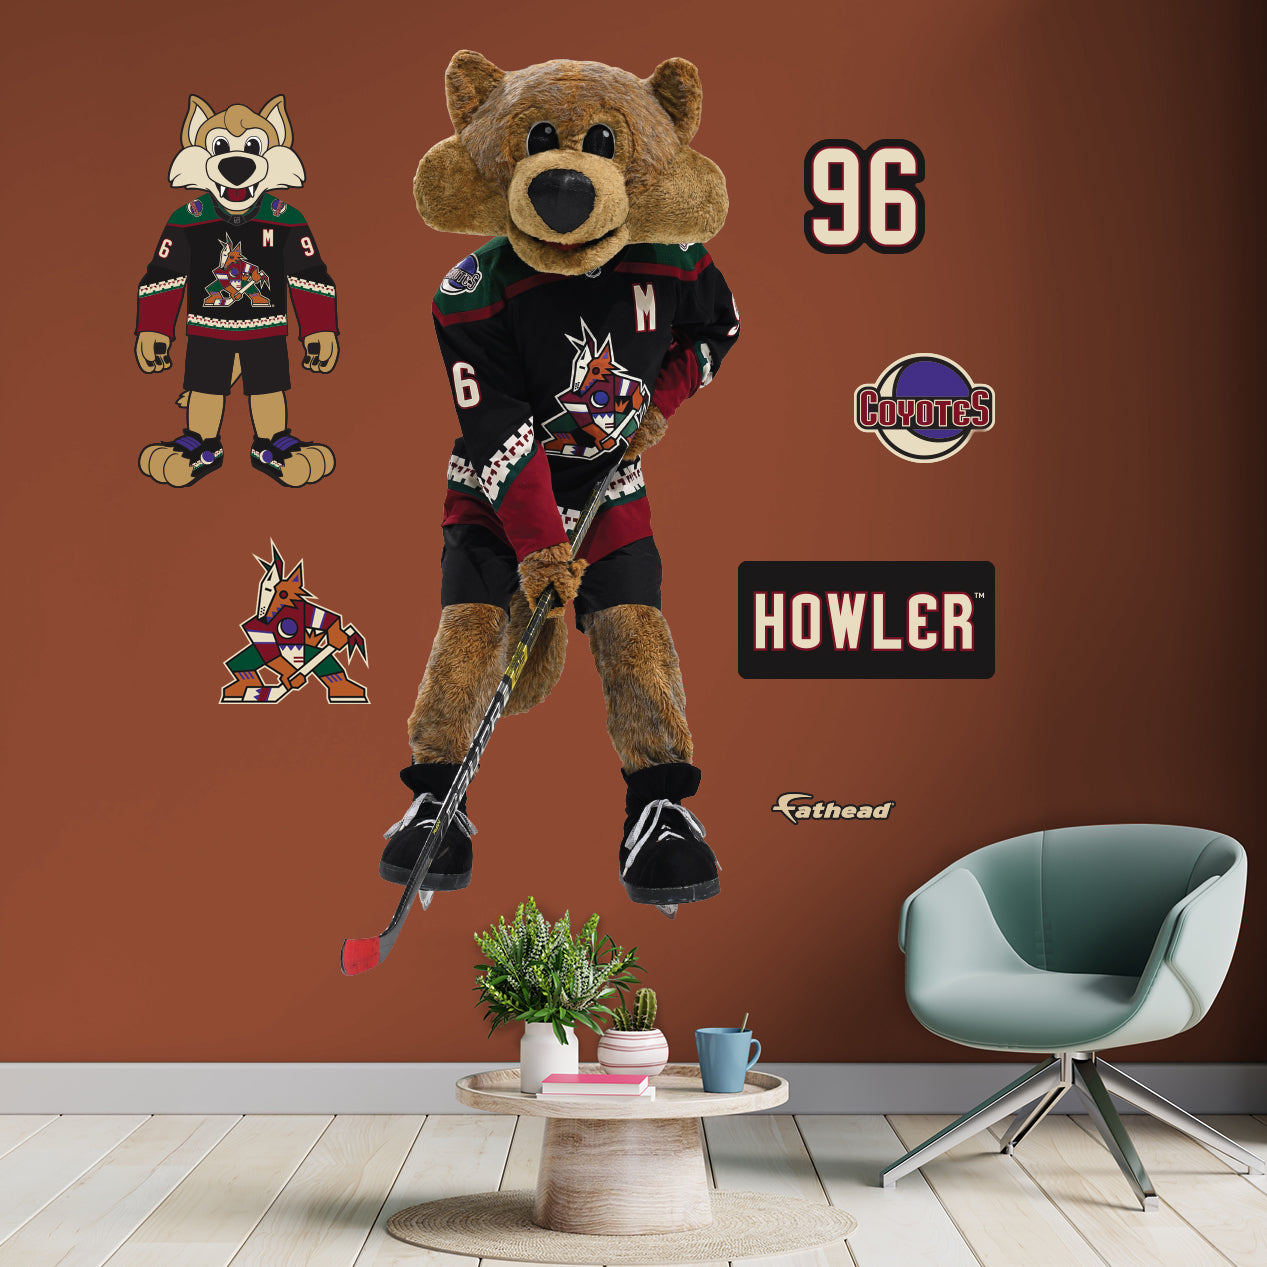 Howler the Coyote (@howlercoyote) • Instagram photos and videos